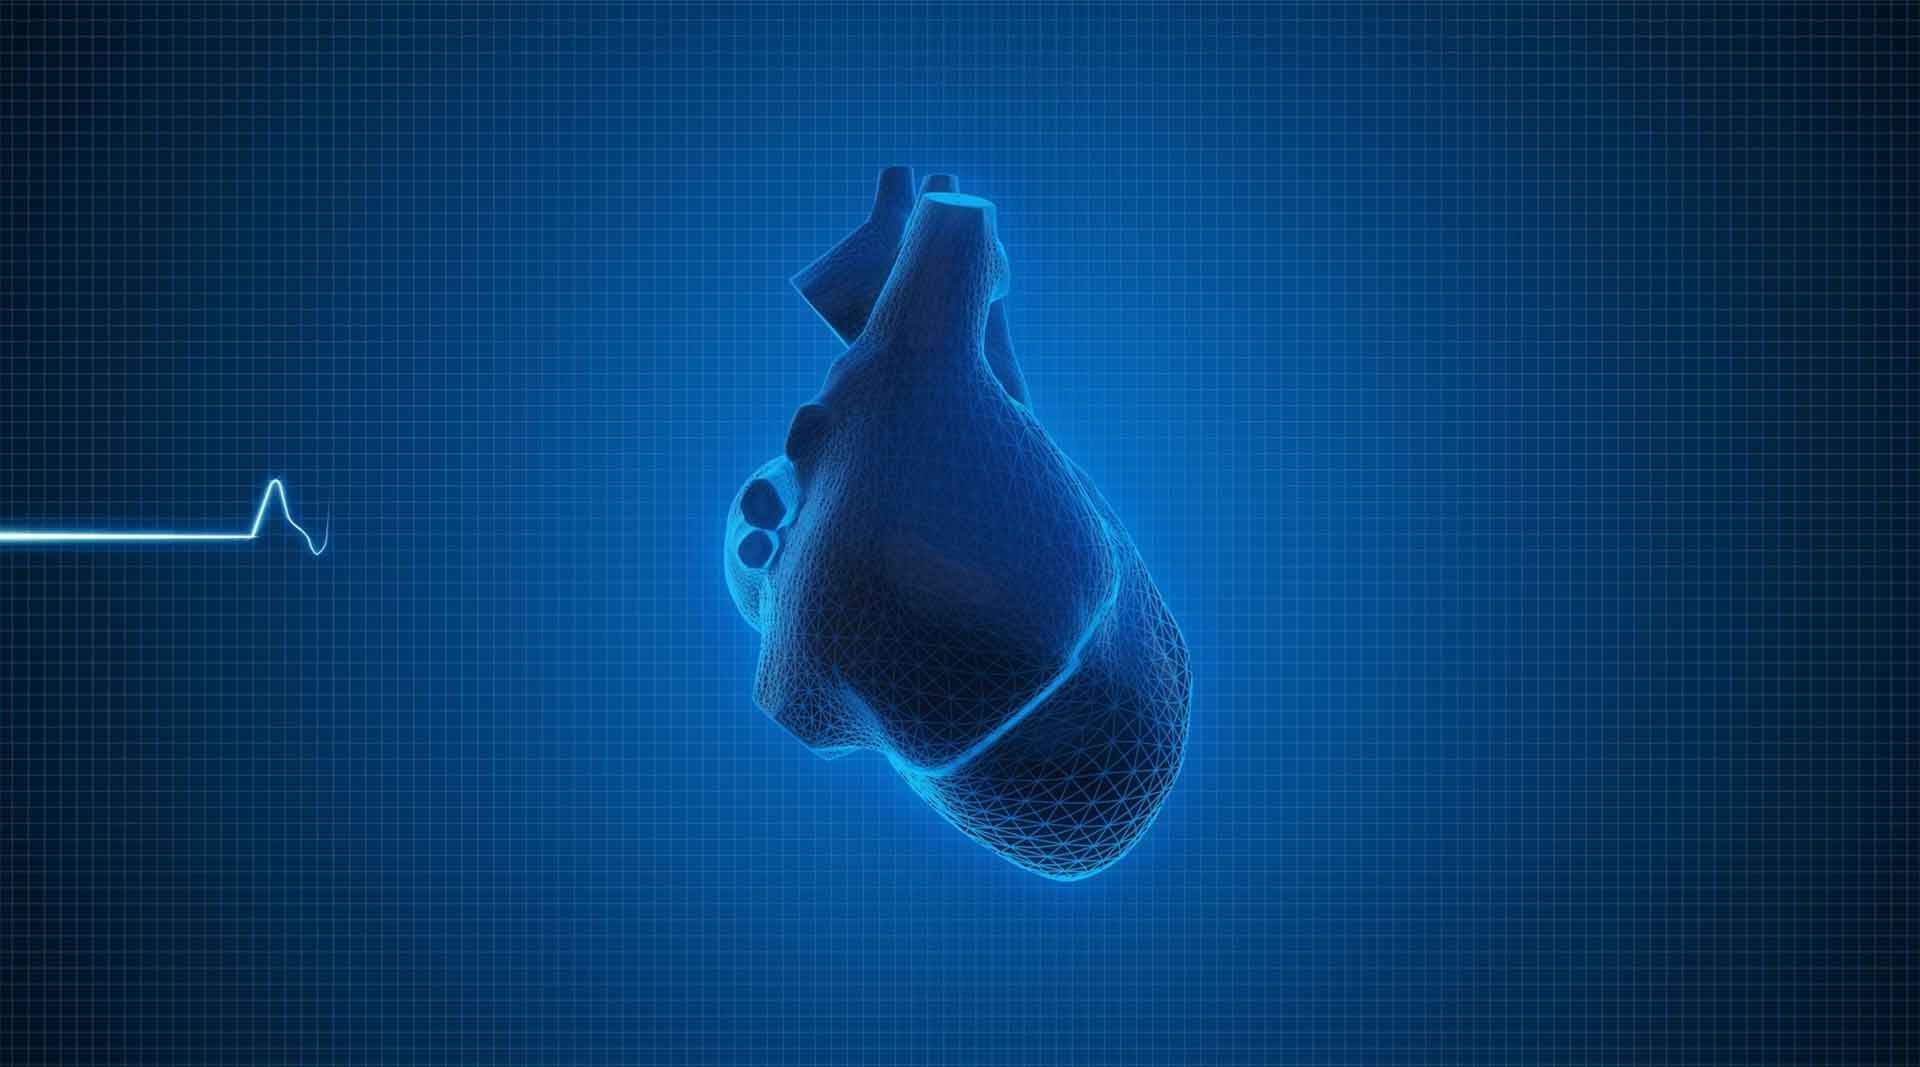 Advances in machine learning – moving cardiology to the next level